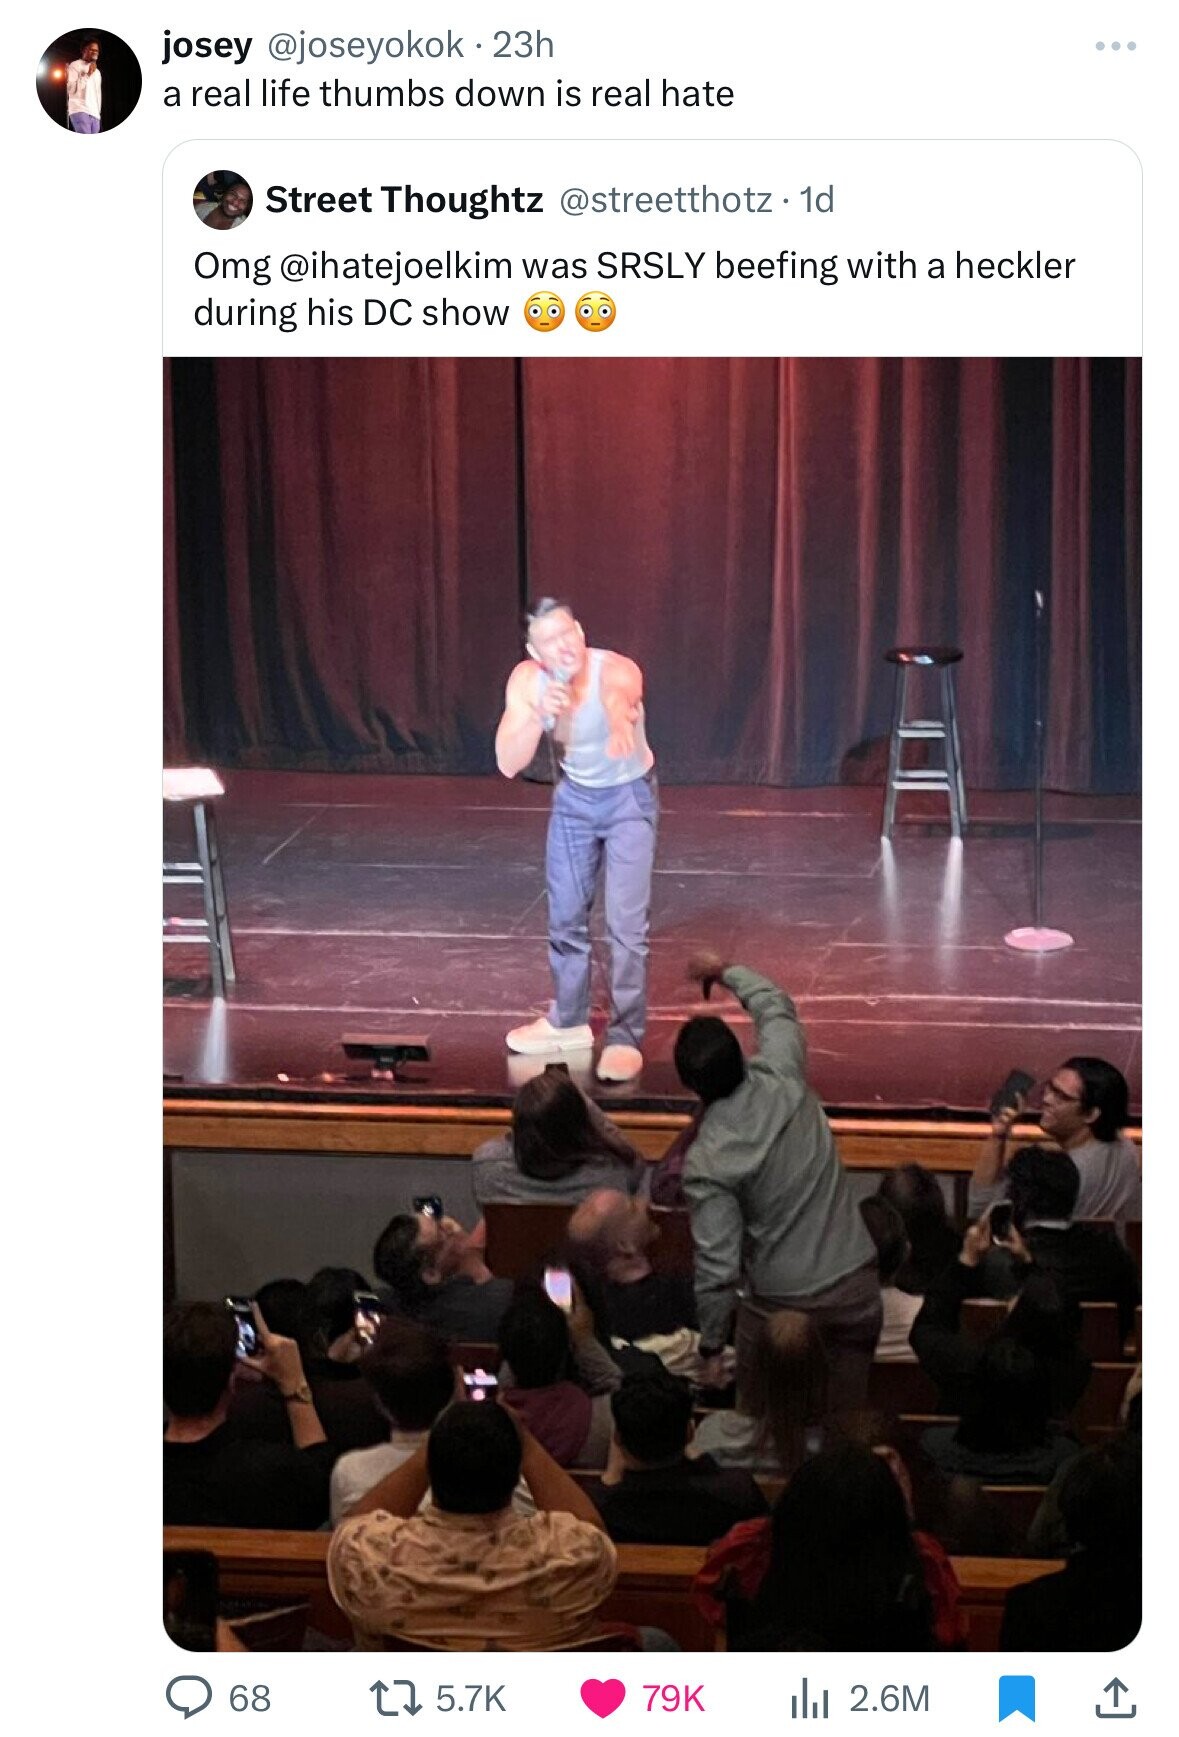 presentation - josey 23h a real life thumbs down is real hate Street Thoughtz 1d Omg was Srsly beefing with a heckler during his Dc show 68 1 79K Ilil 2.6M